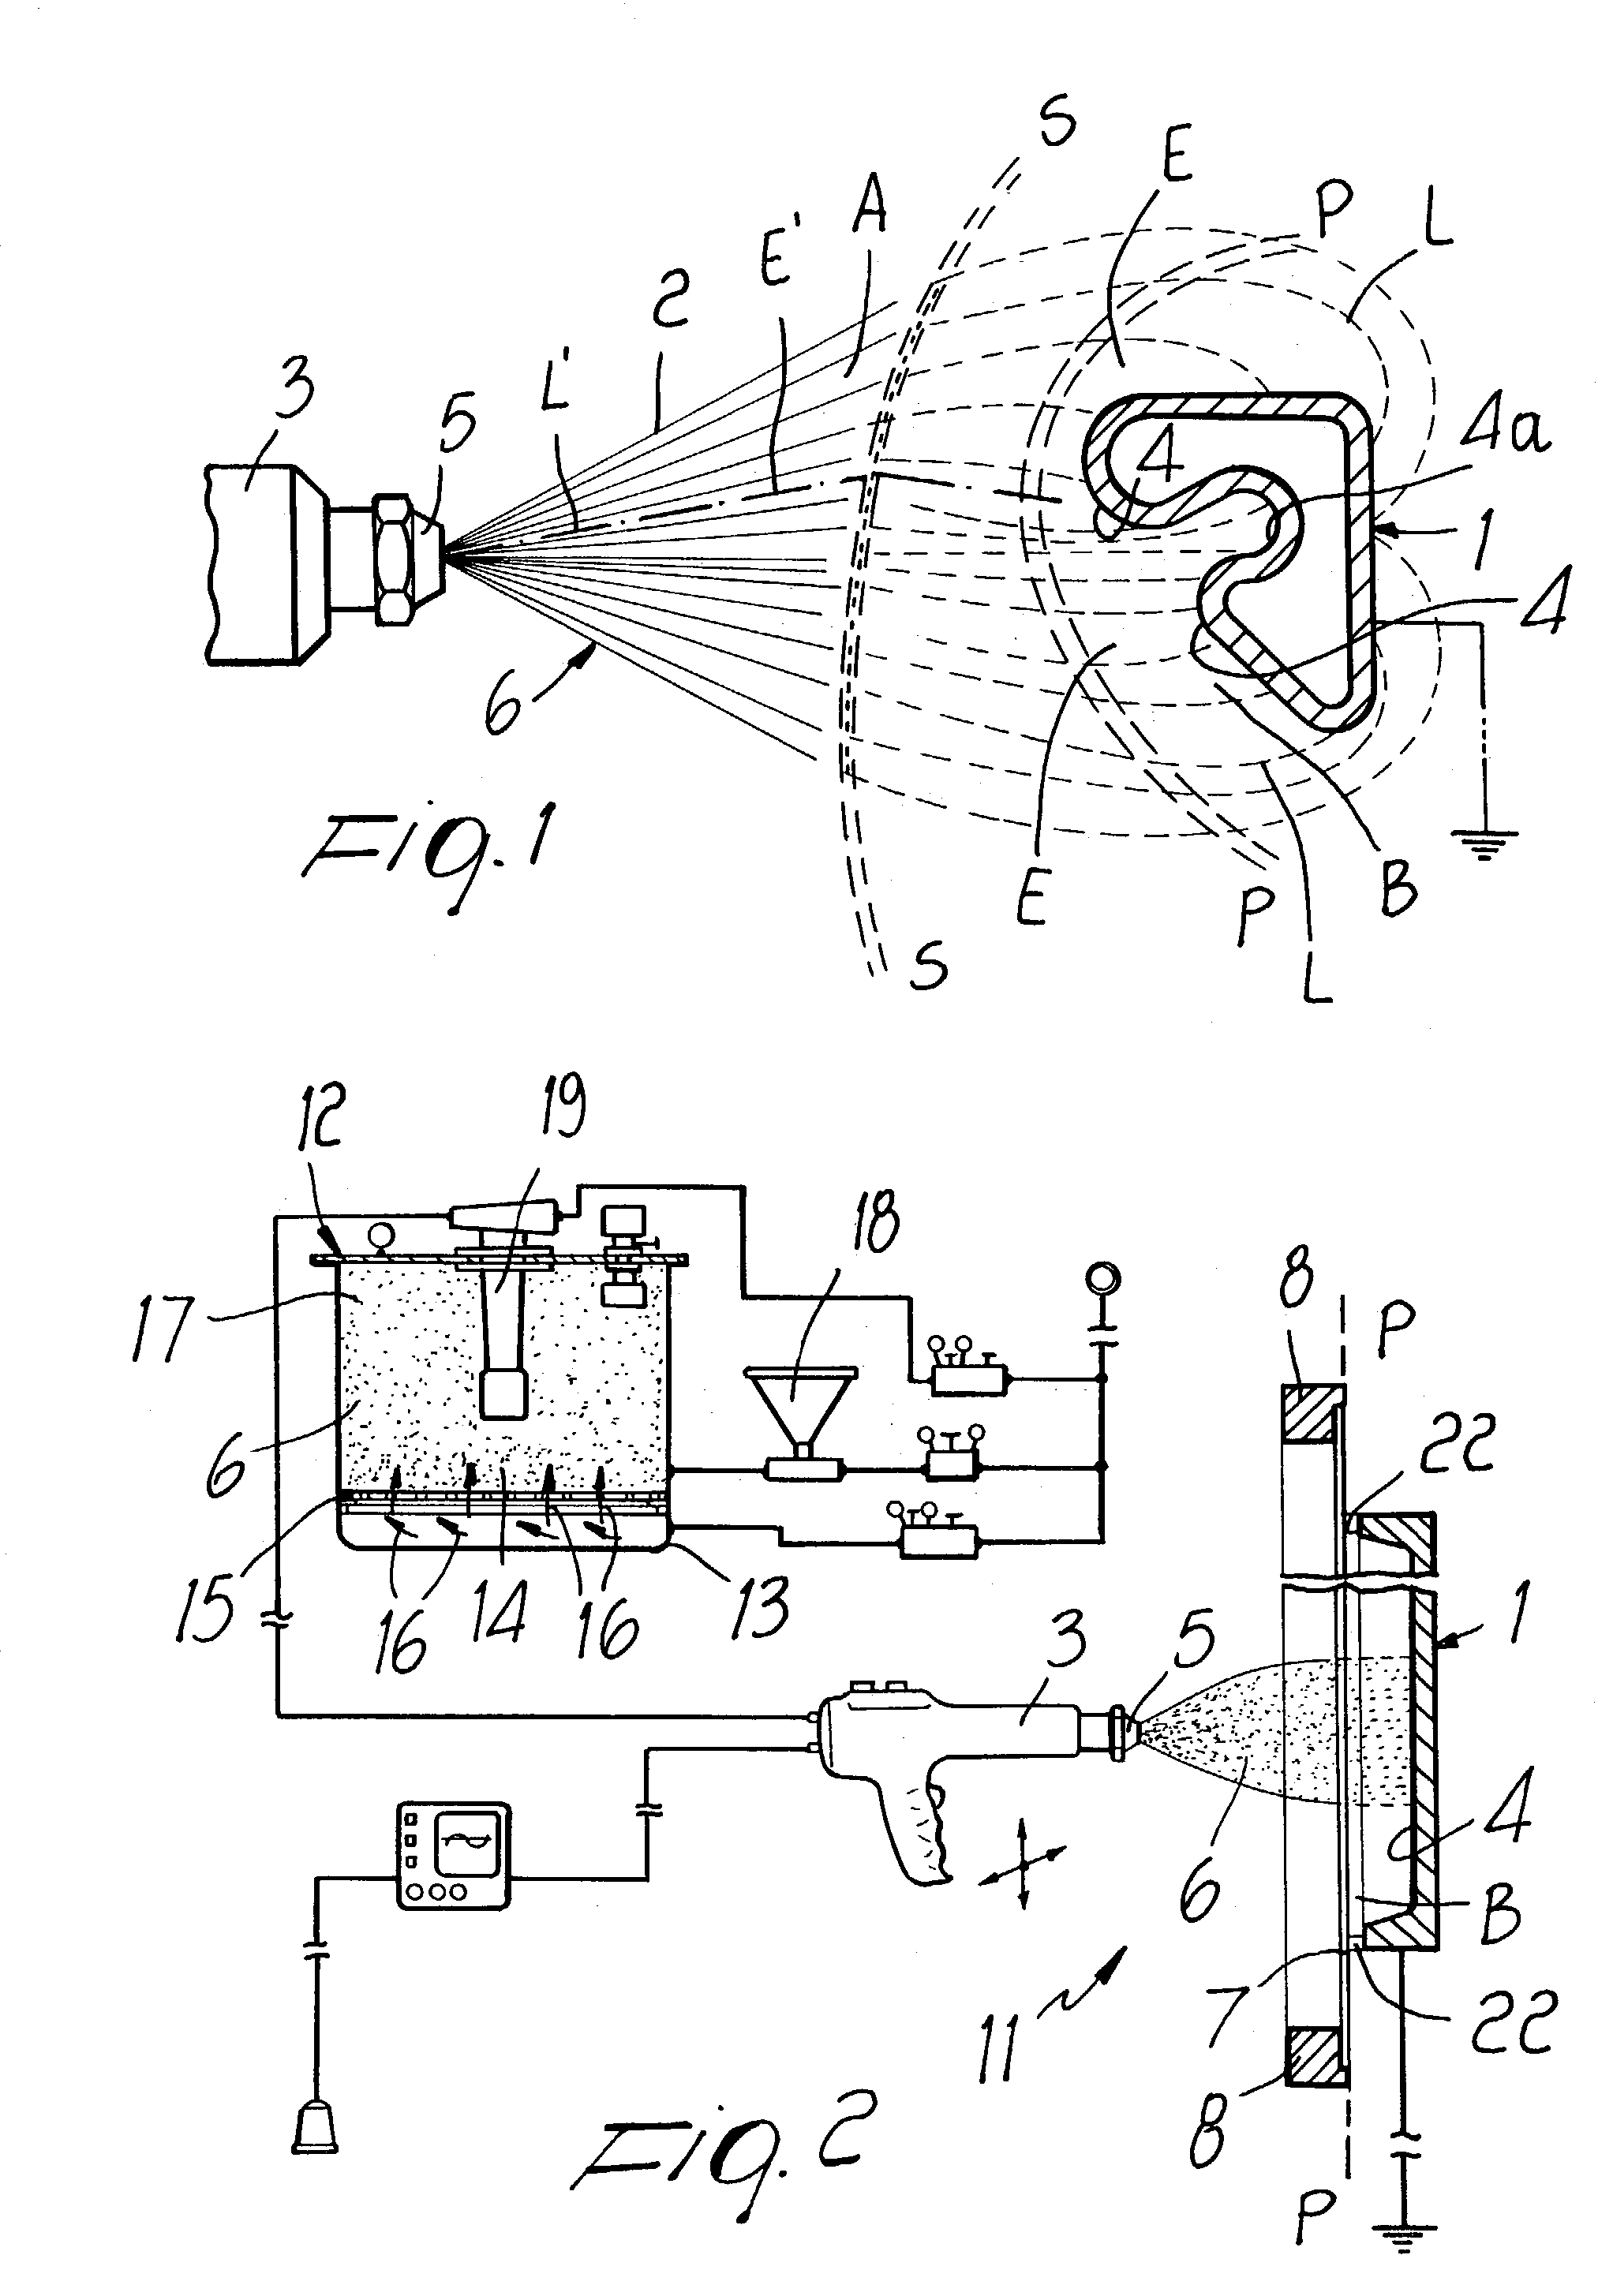 Method for finishing a manufactured article by powder painting